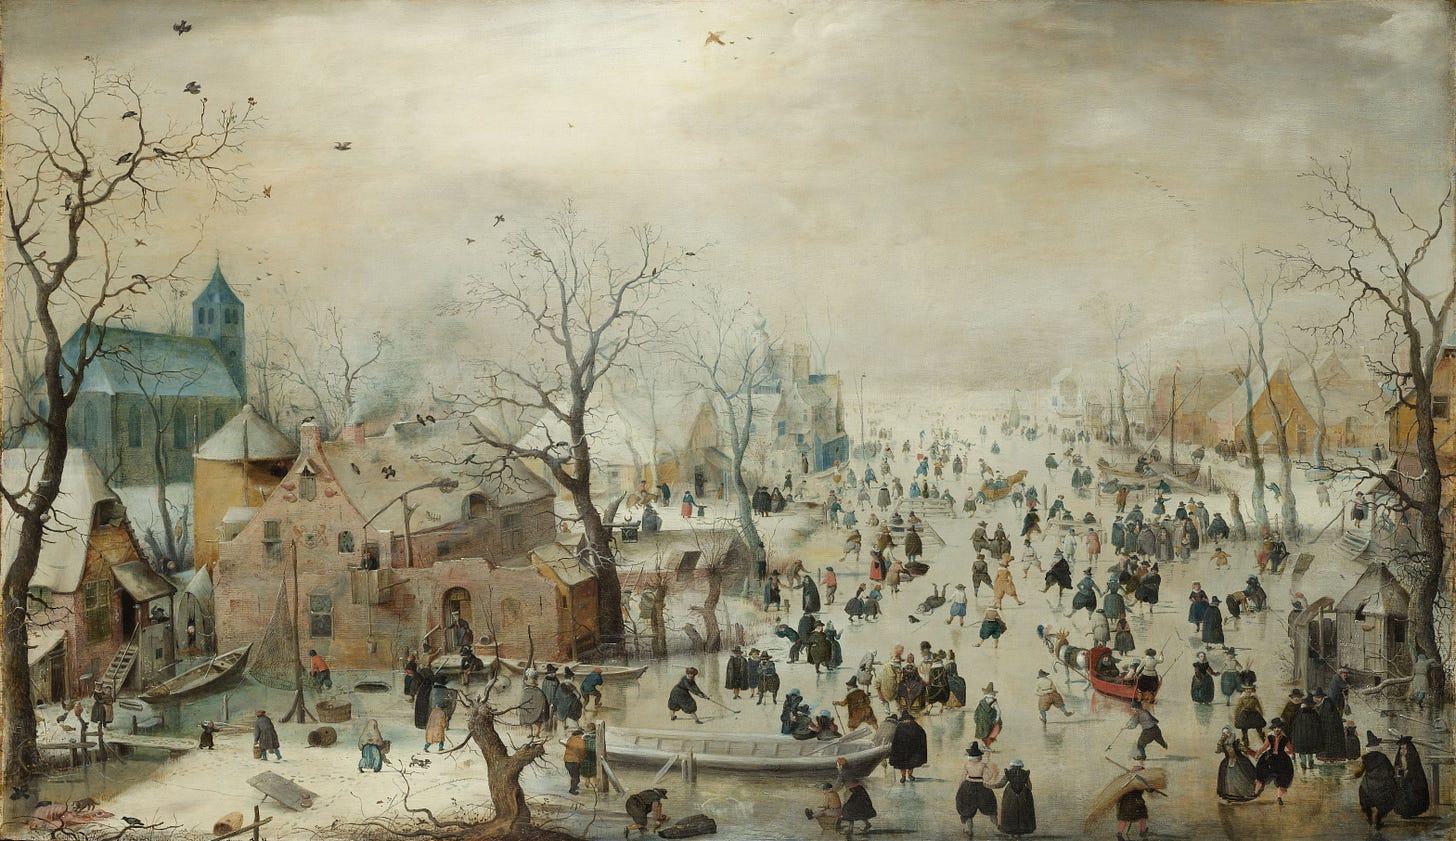 Winter Landscape with Skaters - Wikipedia